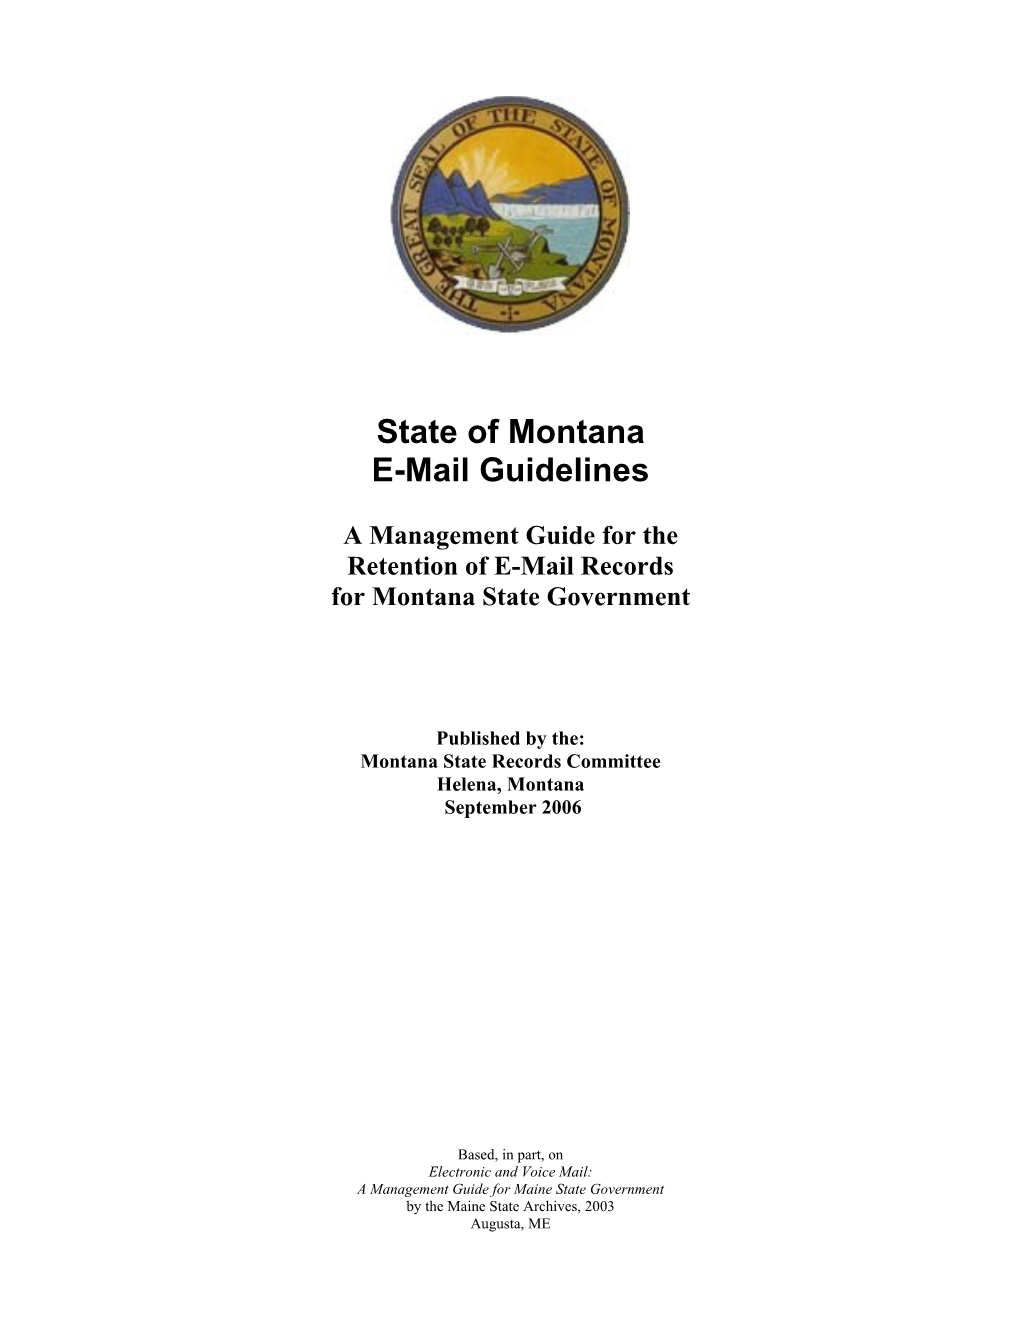 State of Montana E-Mail Guidelines